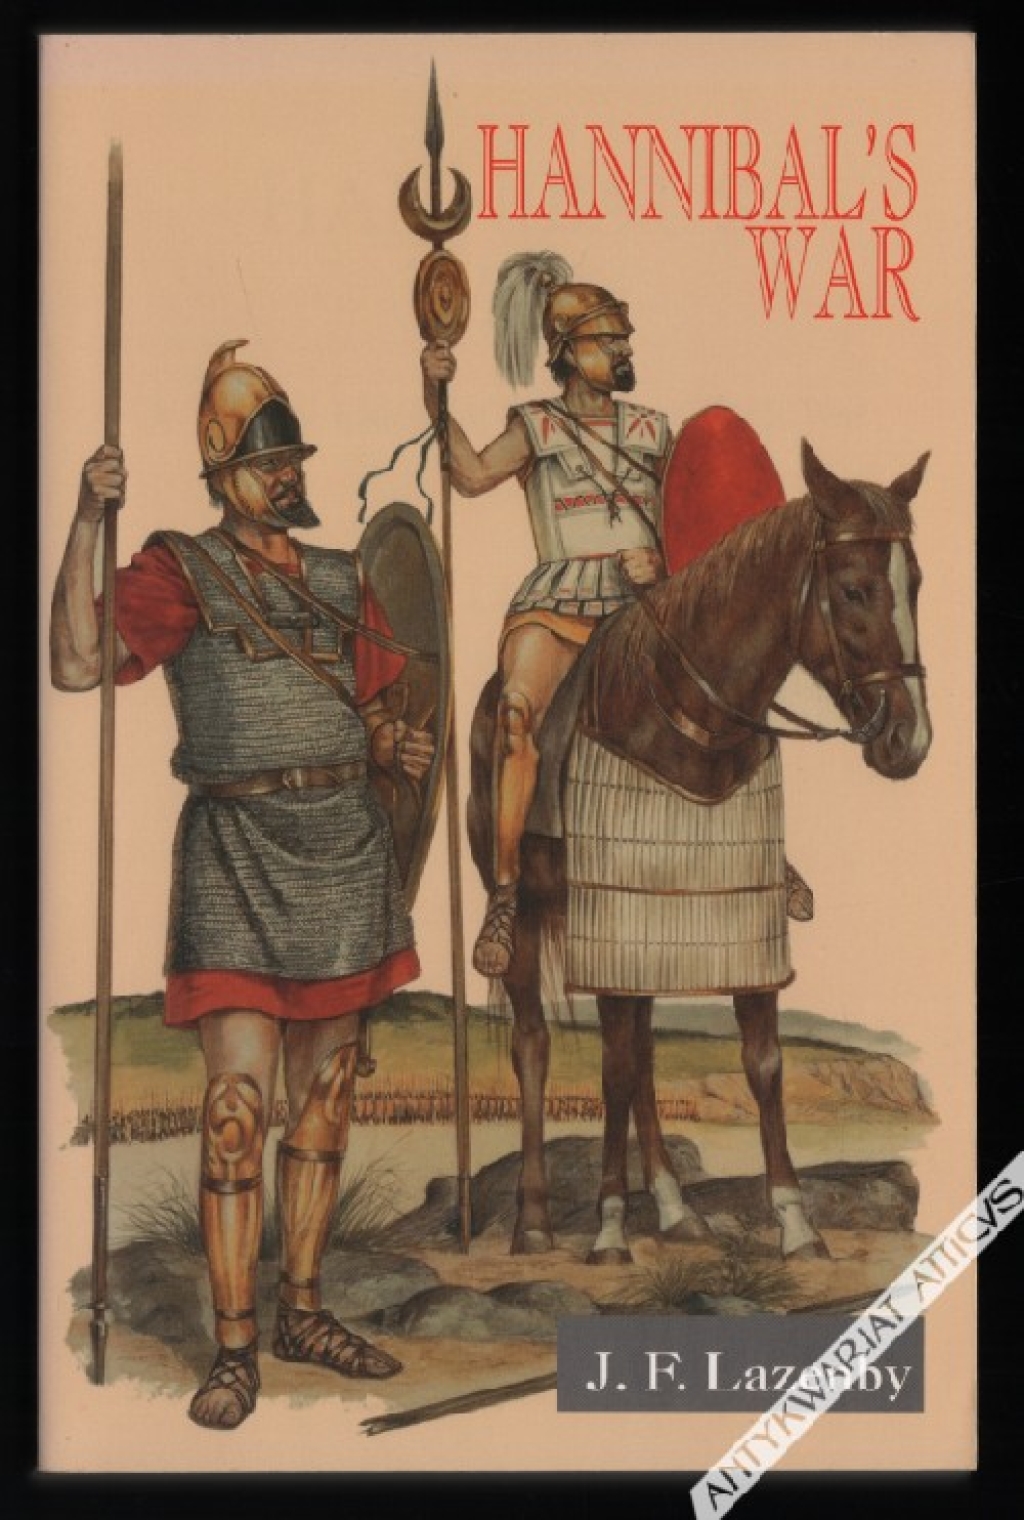 Hannibal's War. A military history of the Second Punic War